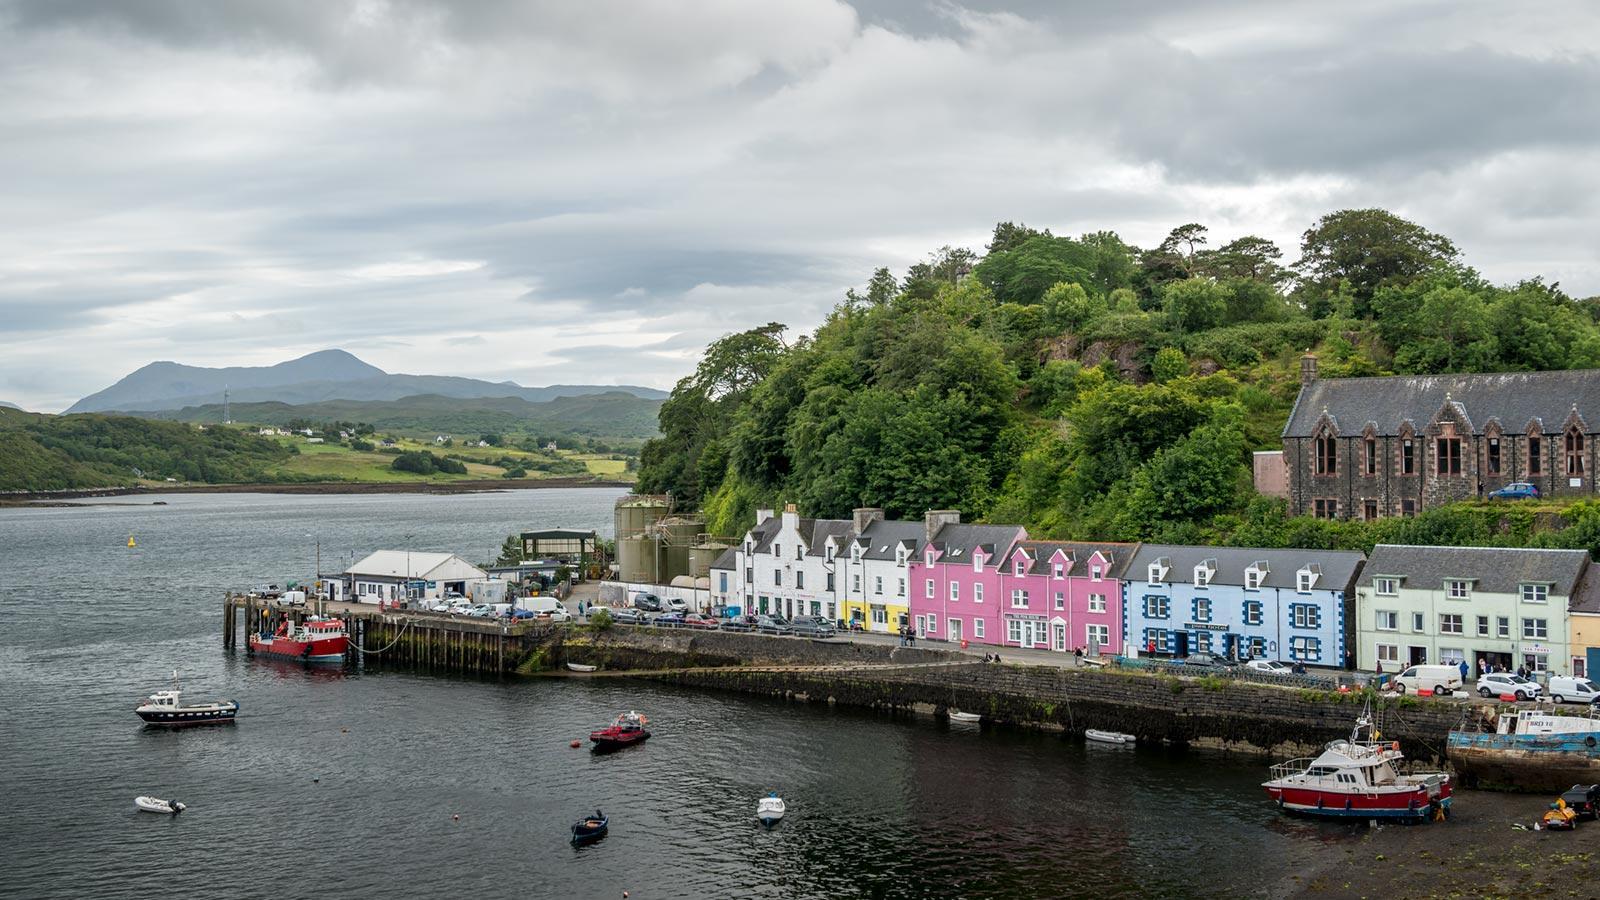 The coloured houses of Portree from the viewpoint.